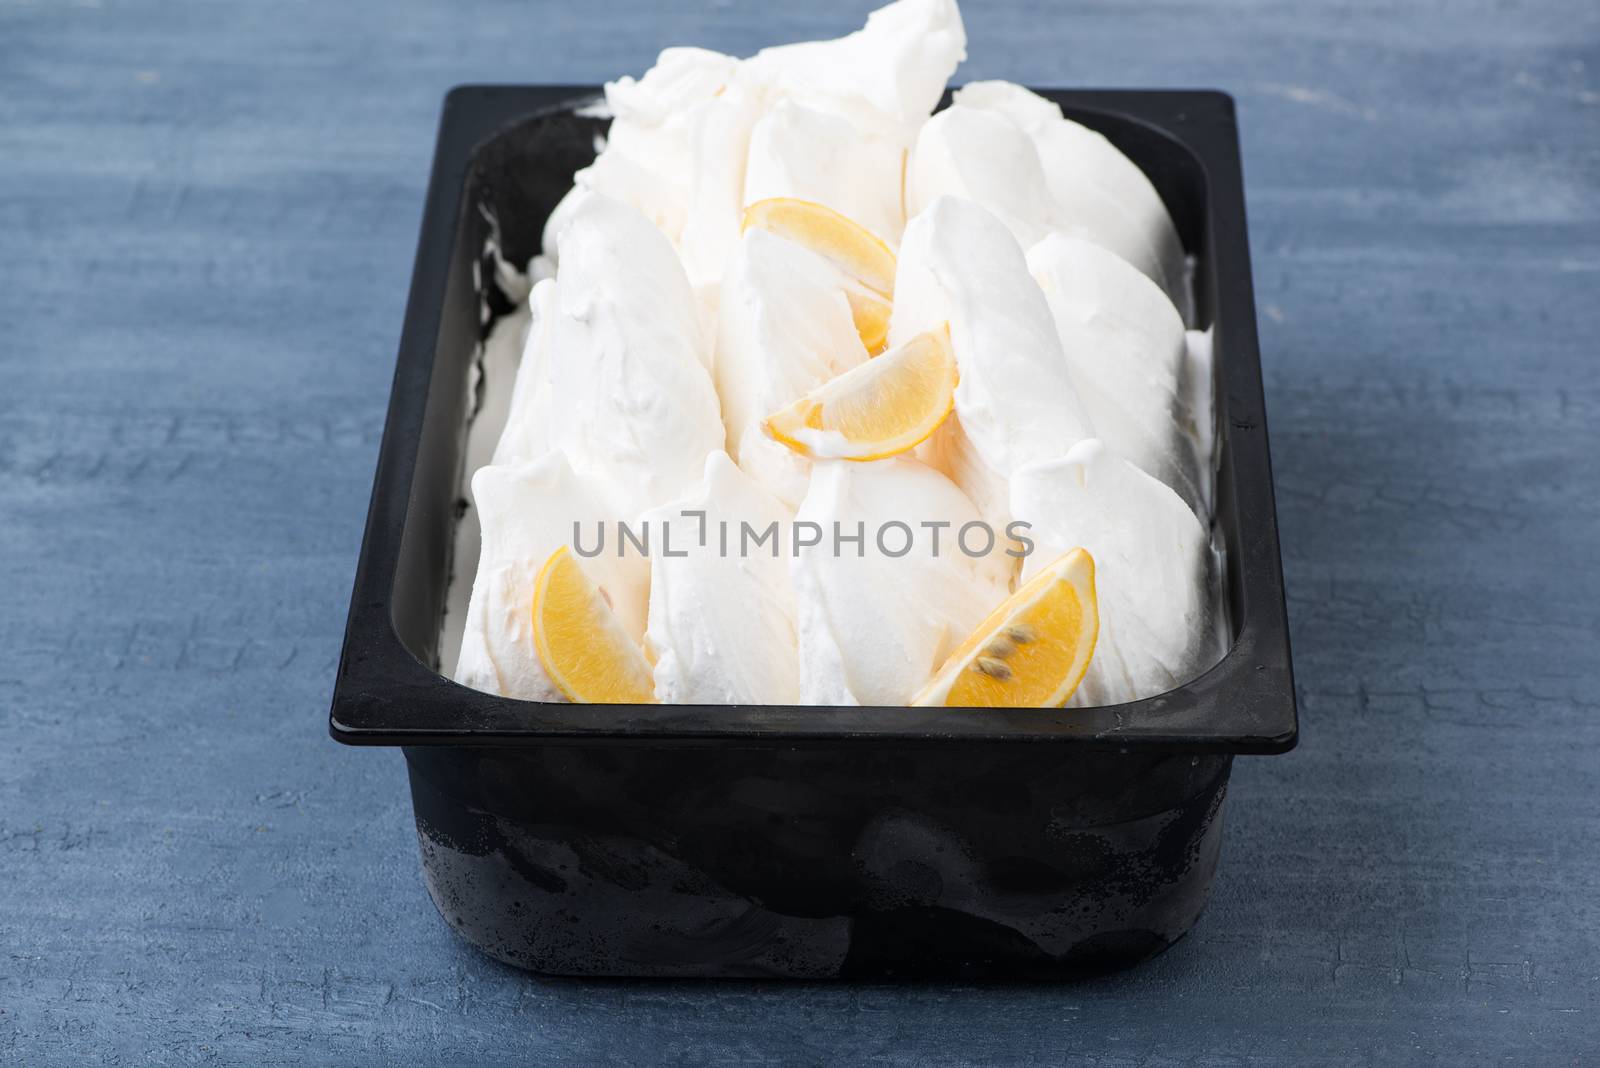 appetizing ice cream in a plastic container on a decorative blue background